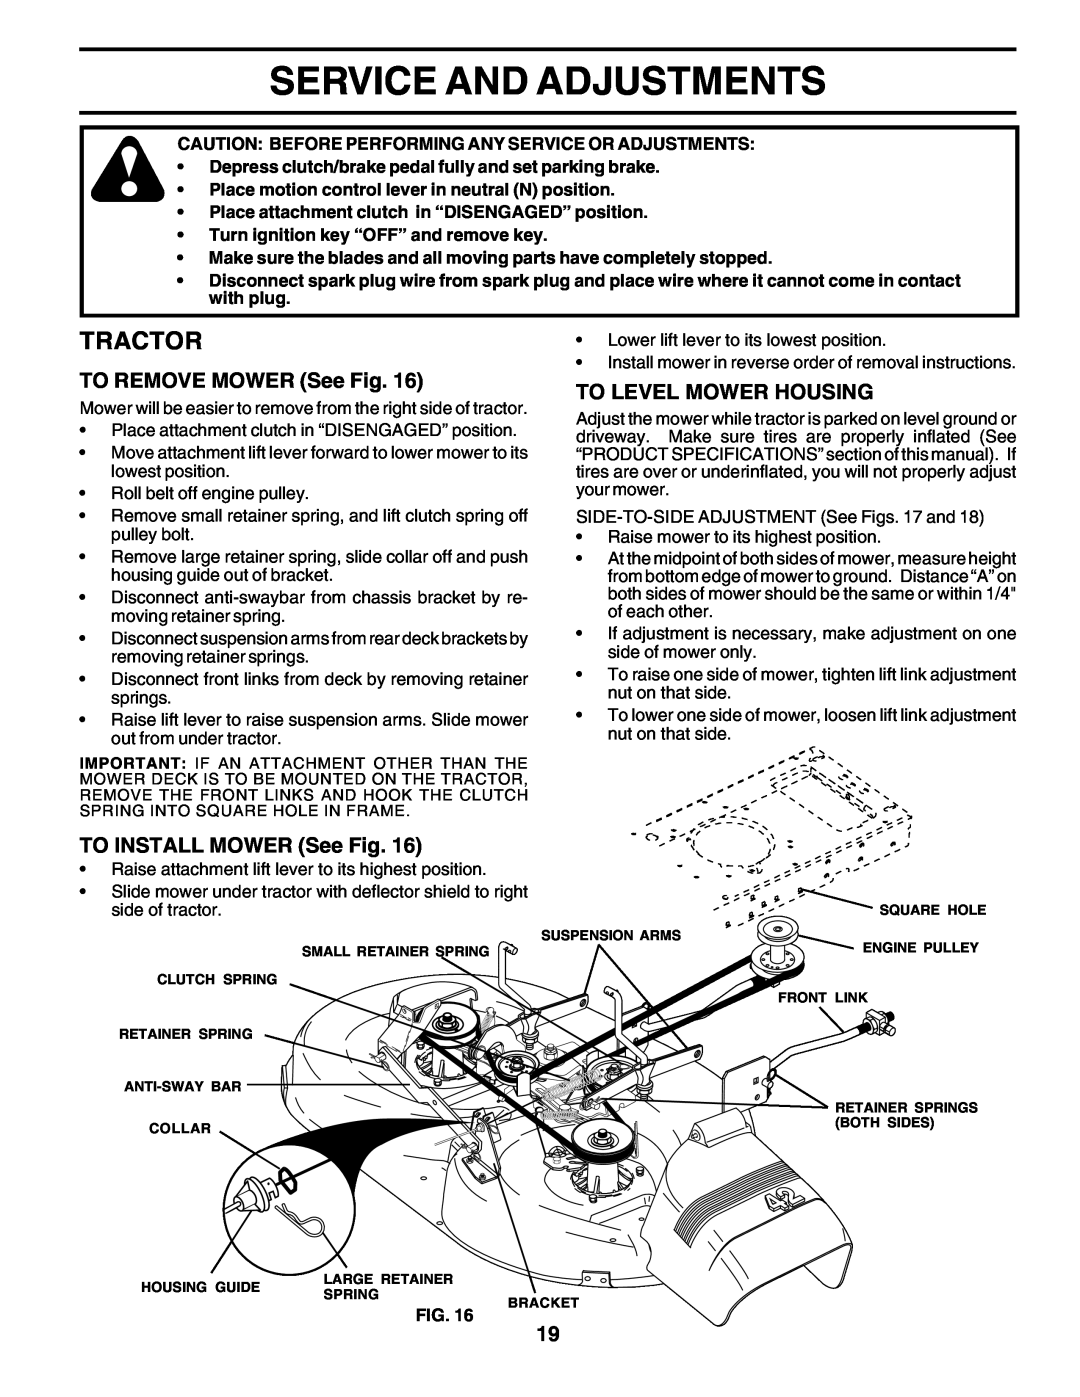 Weed Eater 178704 manual Service And Adjustments, Tractor, TO REMOVE MOWER See Fig, TO INSTALL MOWER See Fig 